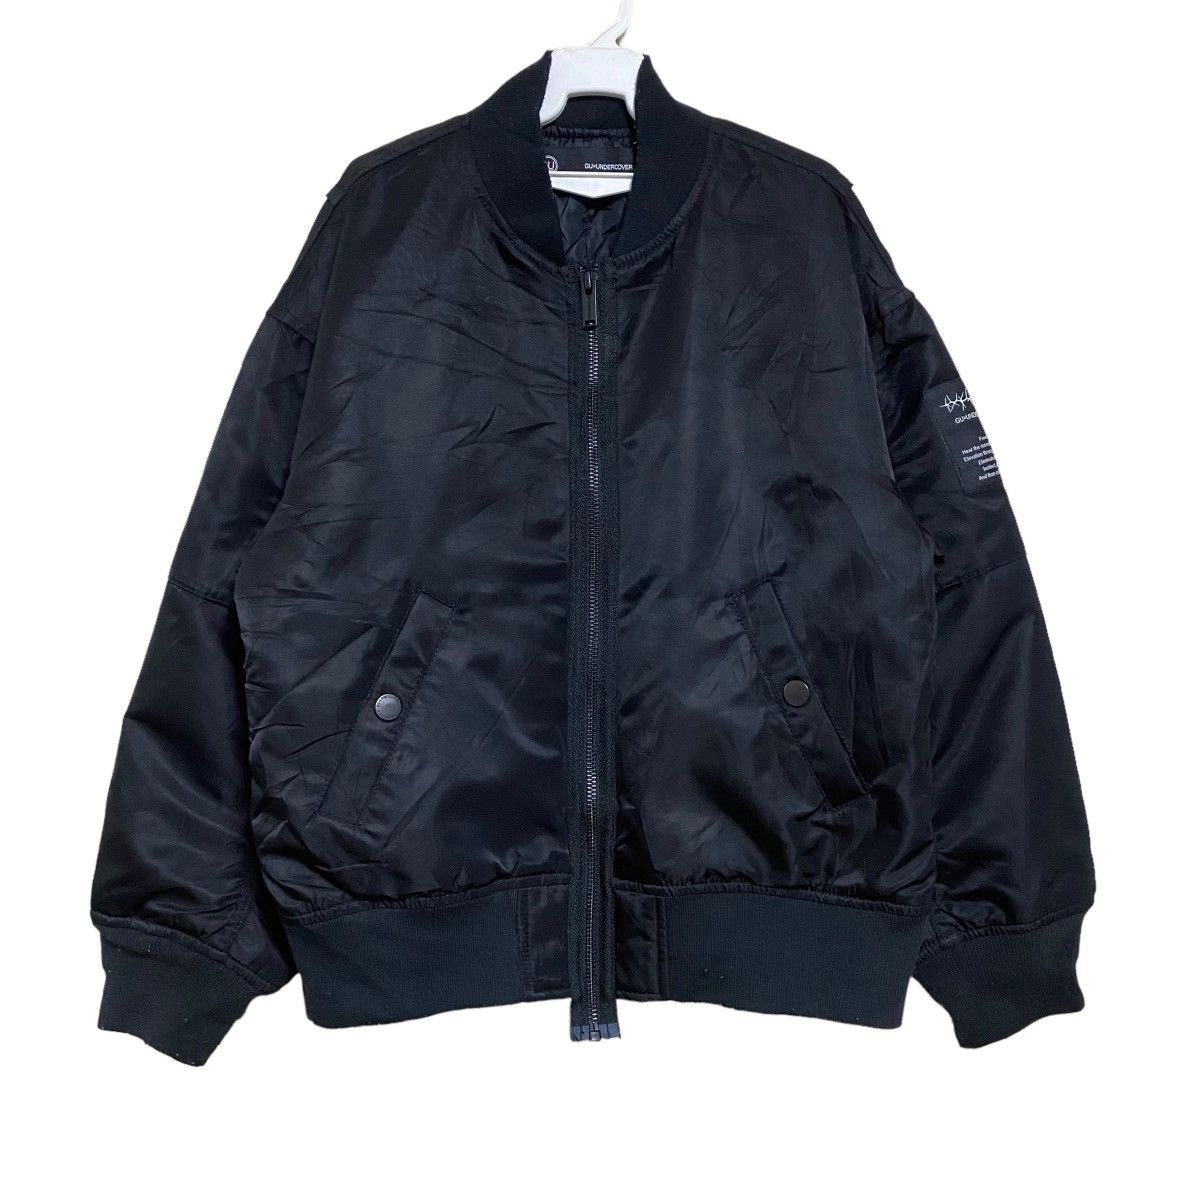 Undercover GU Undercover Freedom Noise MA-1 Bomber Jacket | Grailed